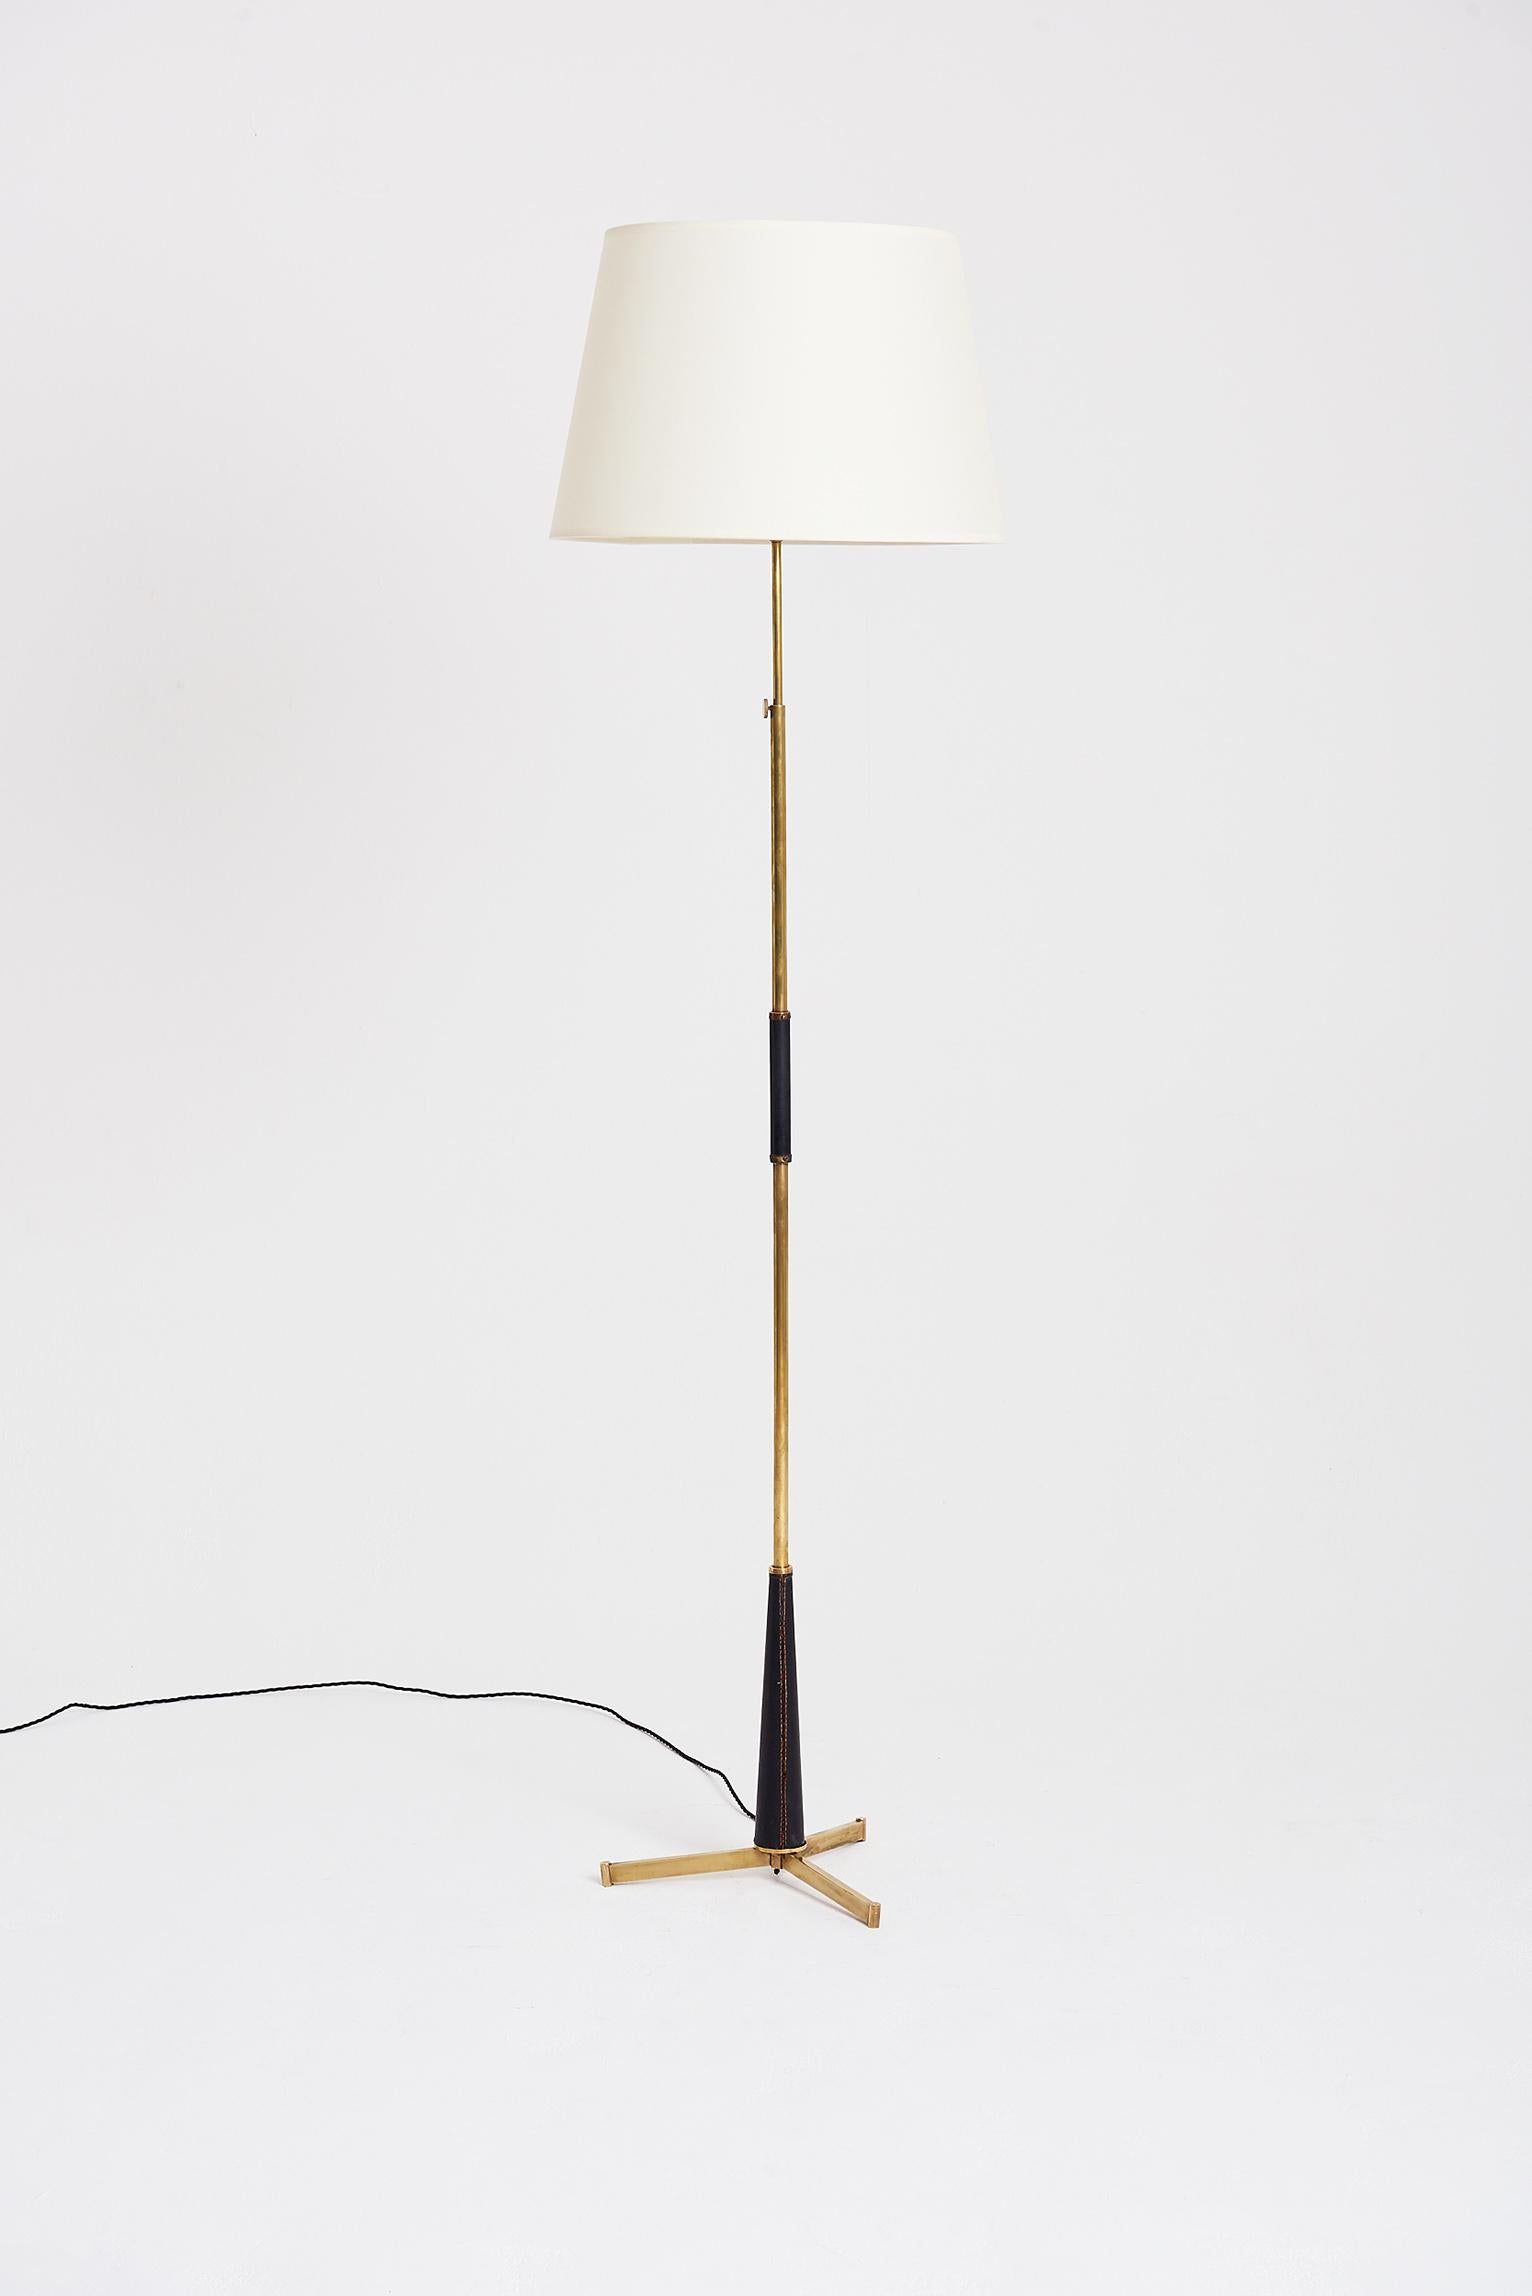 A brass and saddle-stitched black leather floor lamp.
France, circa 1950.
Measures: With the shade: 172 cm high by 45 cm diameter.
Lamp base only: 149 cm high by 40 cm diameter.